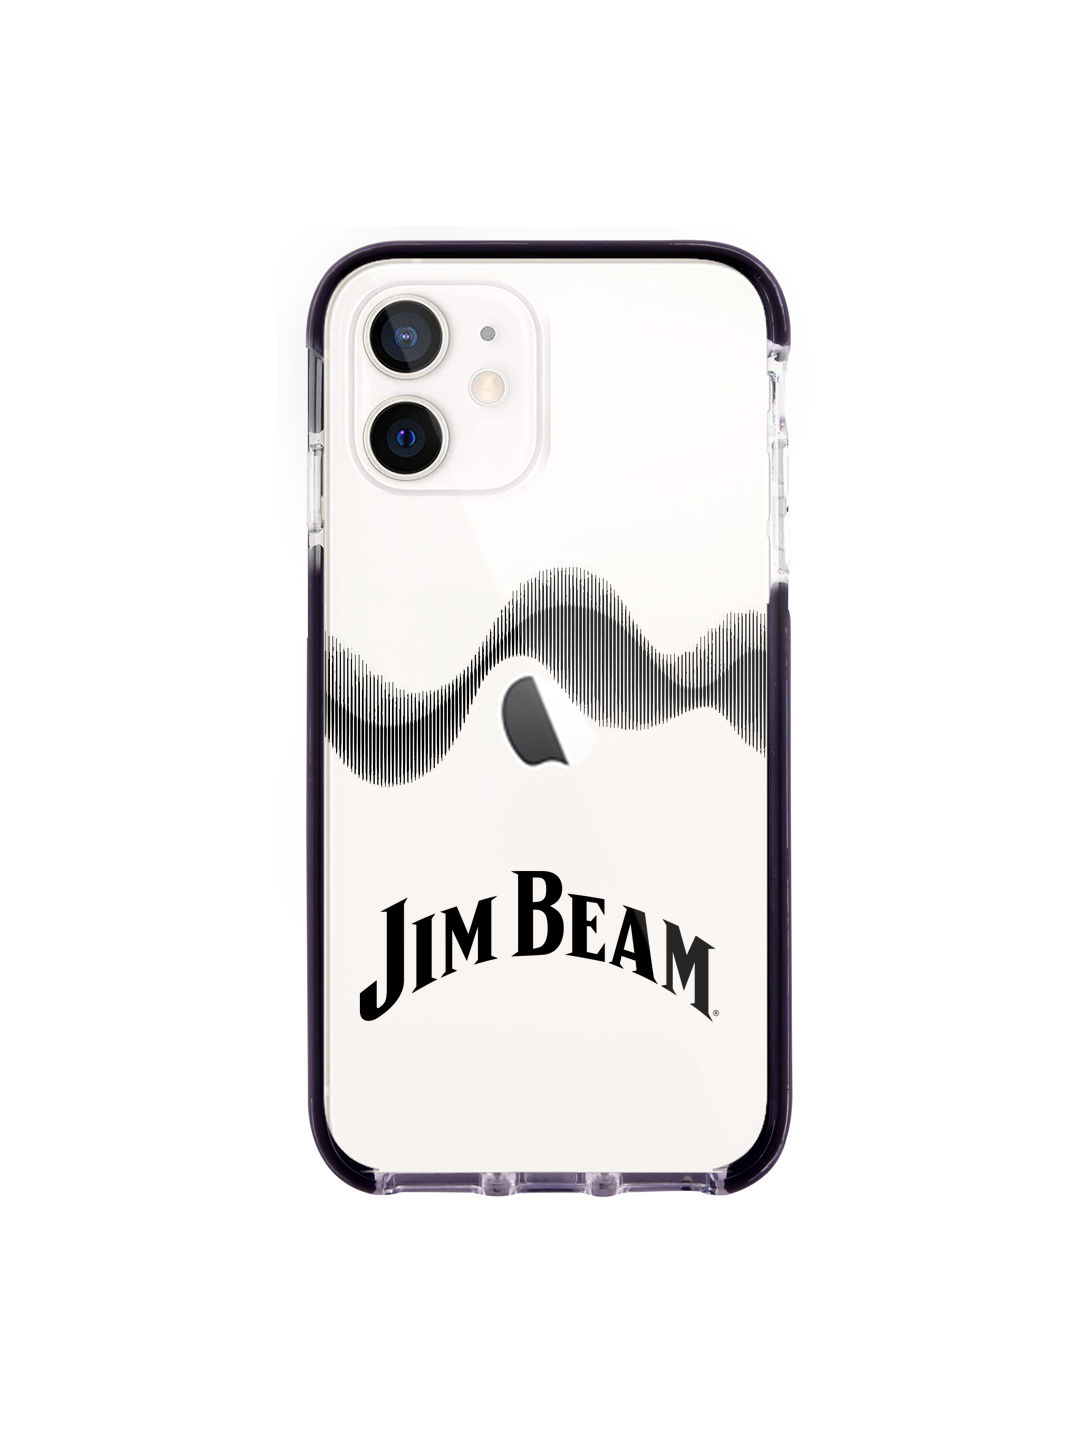 Jim Beam Sound Waves - Shield Case for iPhone 12 Mini